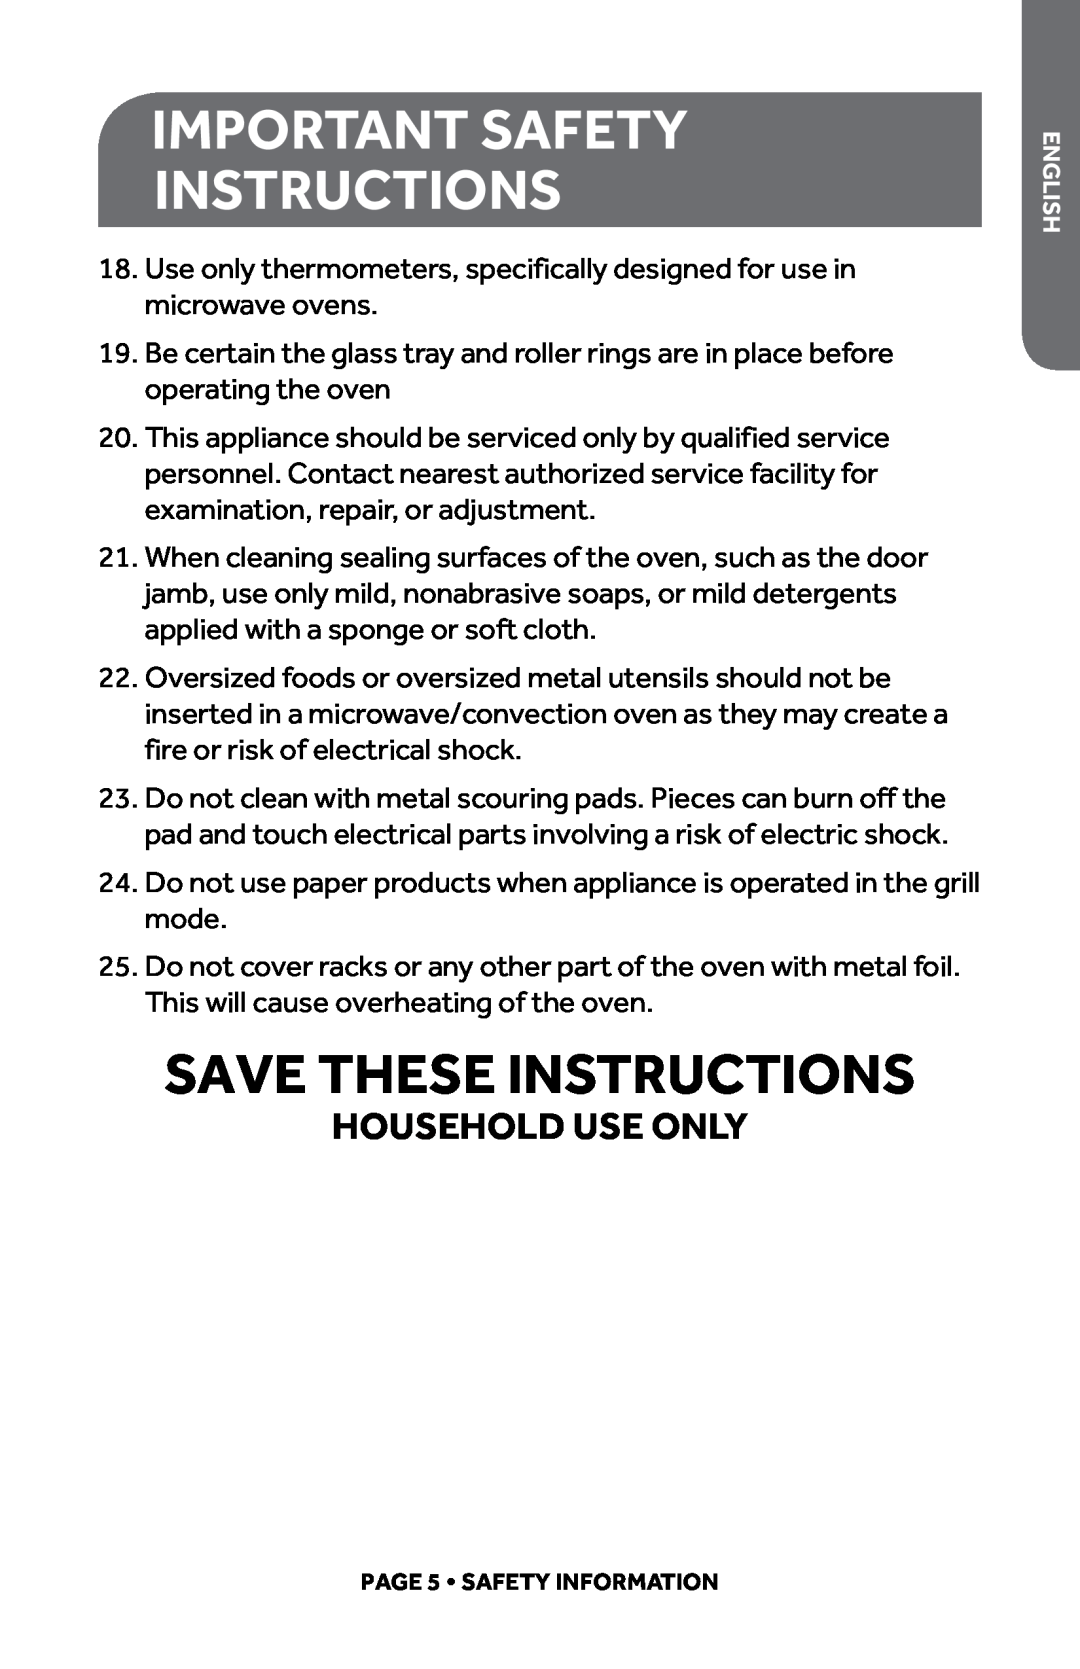 Haier HMC1085SESS user manual Household Use Only, important safety instructions, Save These Instructions 